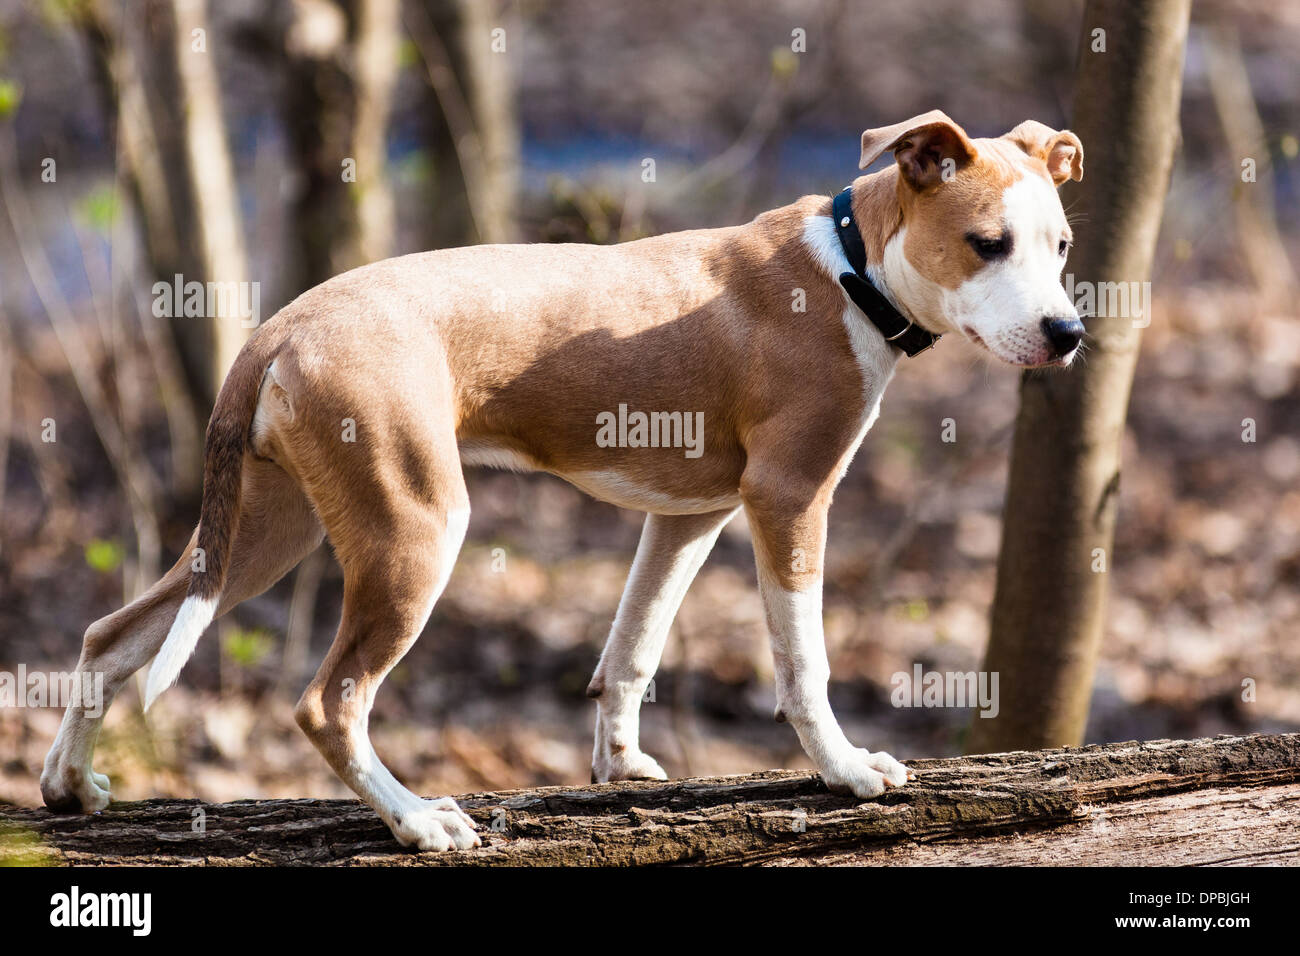 Staffordshire Bull Terrier. A dog wearing a collar walking outdoors. Stock Photo